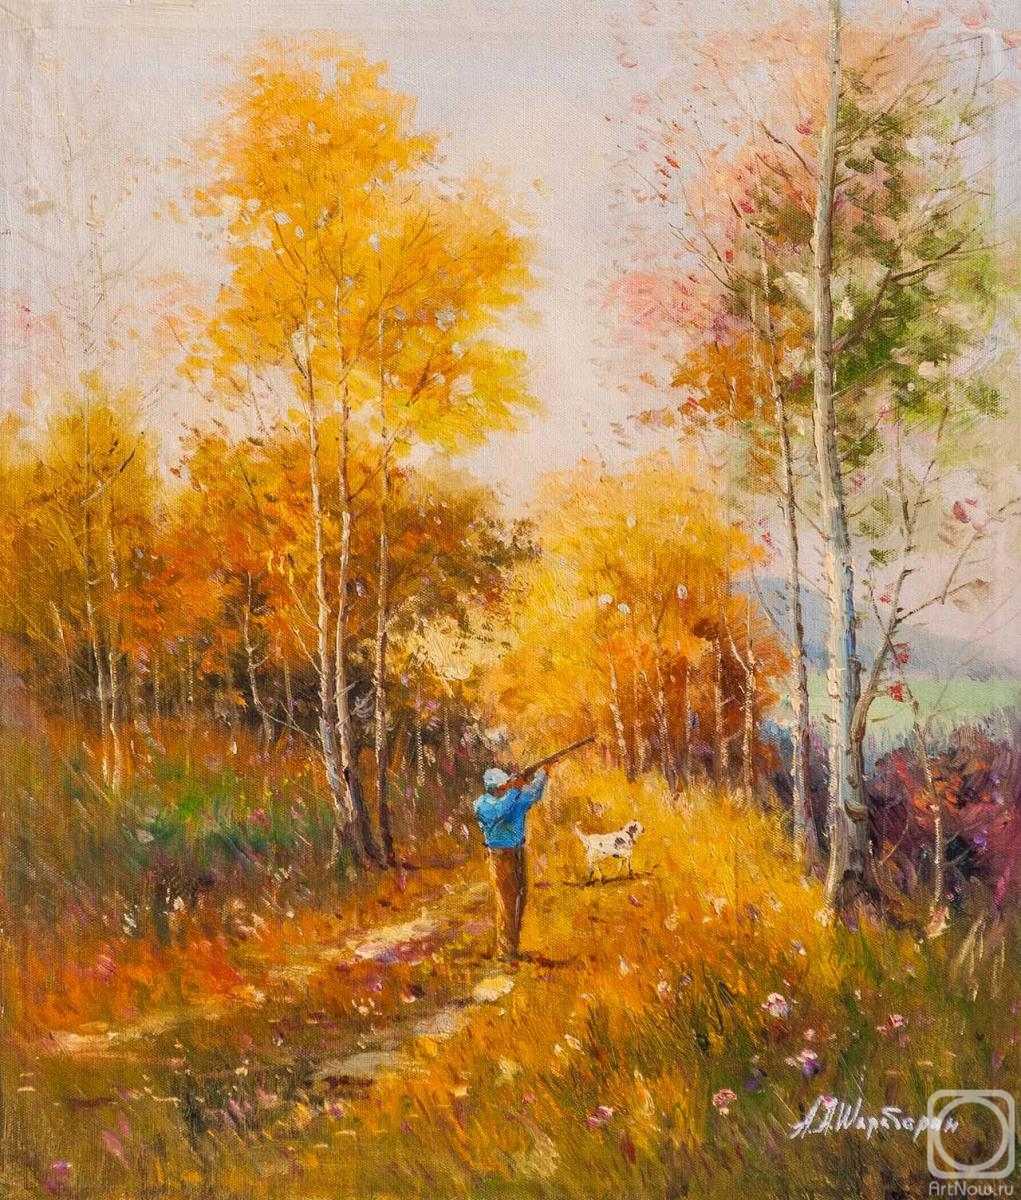 Sharabarin Andrey. Hunting in the autumn forest